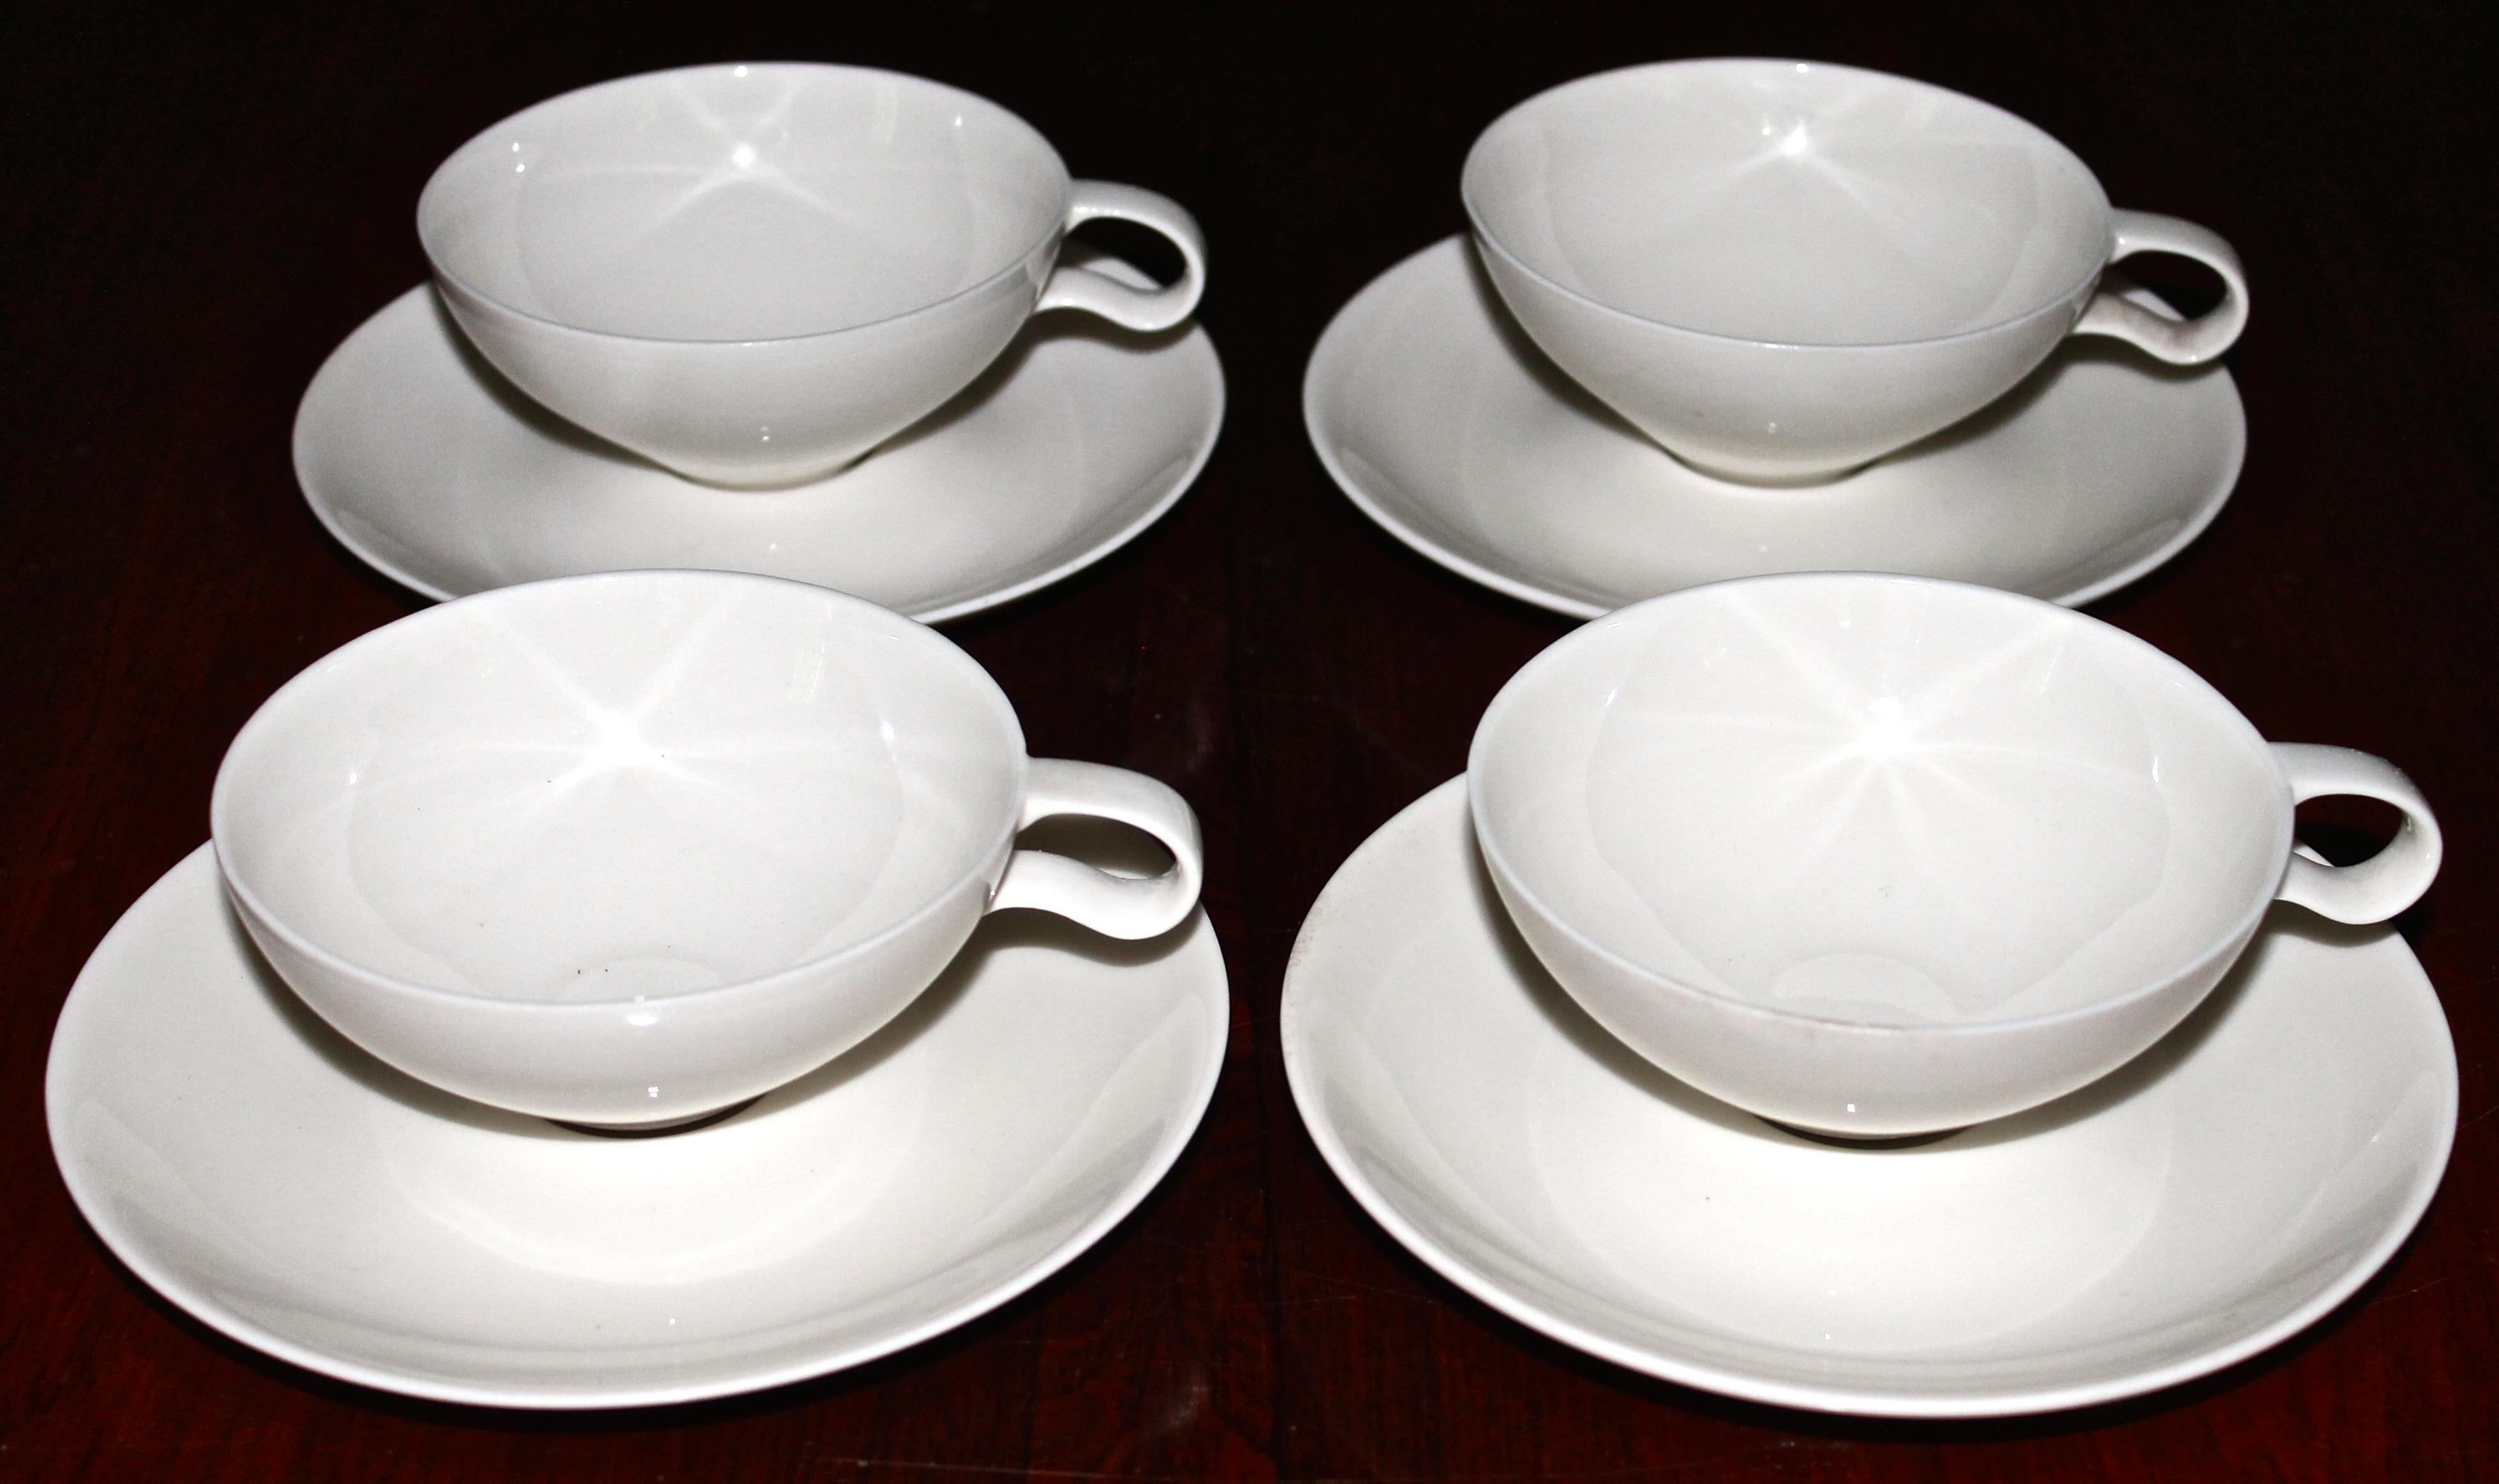 The original discontinued cups with the downward handles from the famous set commissioned by The Museum of Modern Art (MOMA). Four cups and four saucers, most are signed.